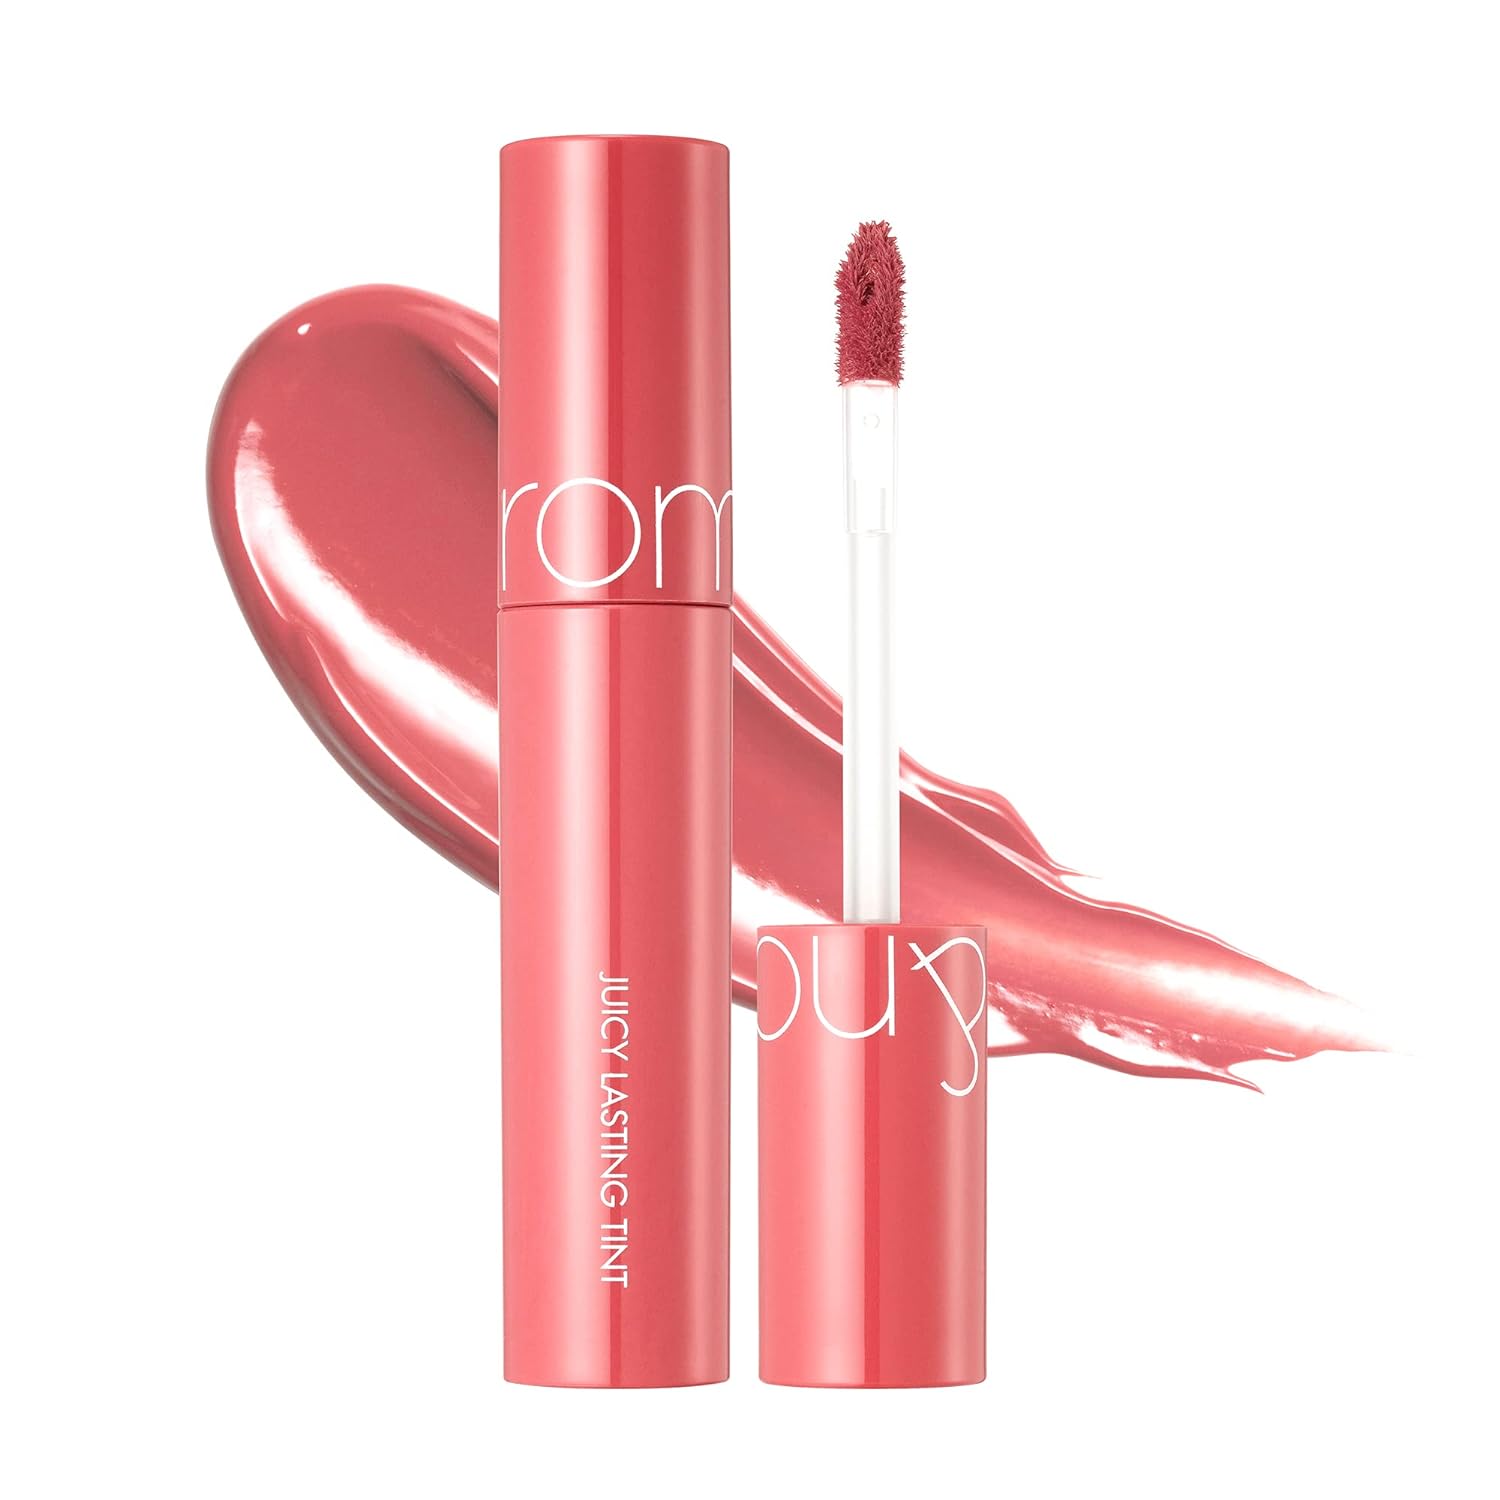 Rom&nd better Juicy Lasting Tint, 5.5g